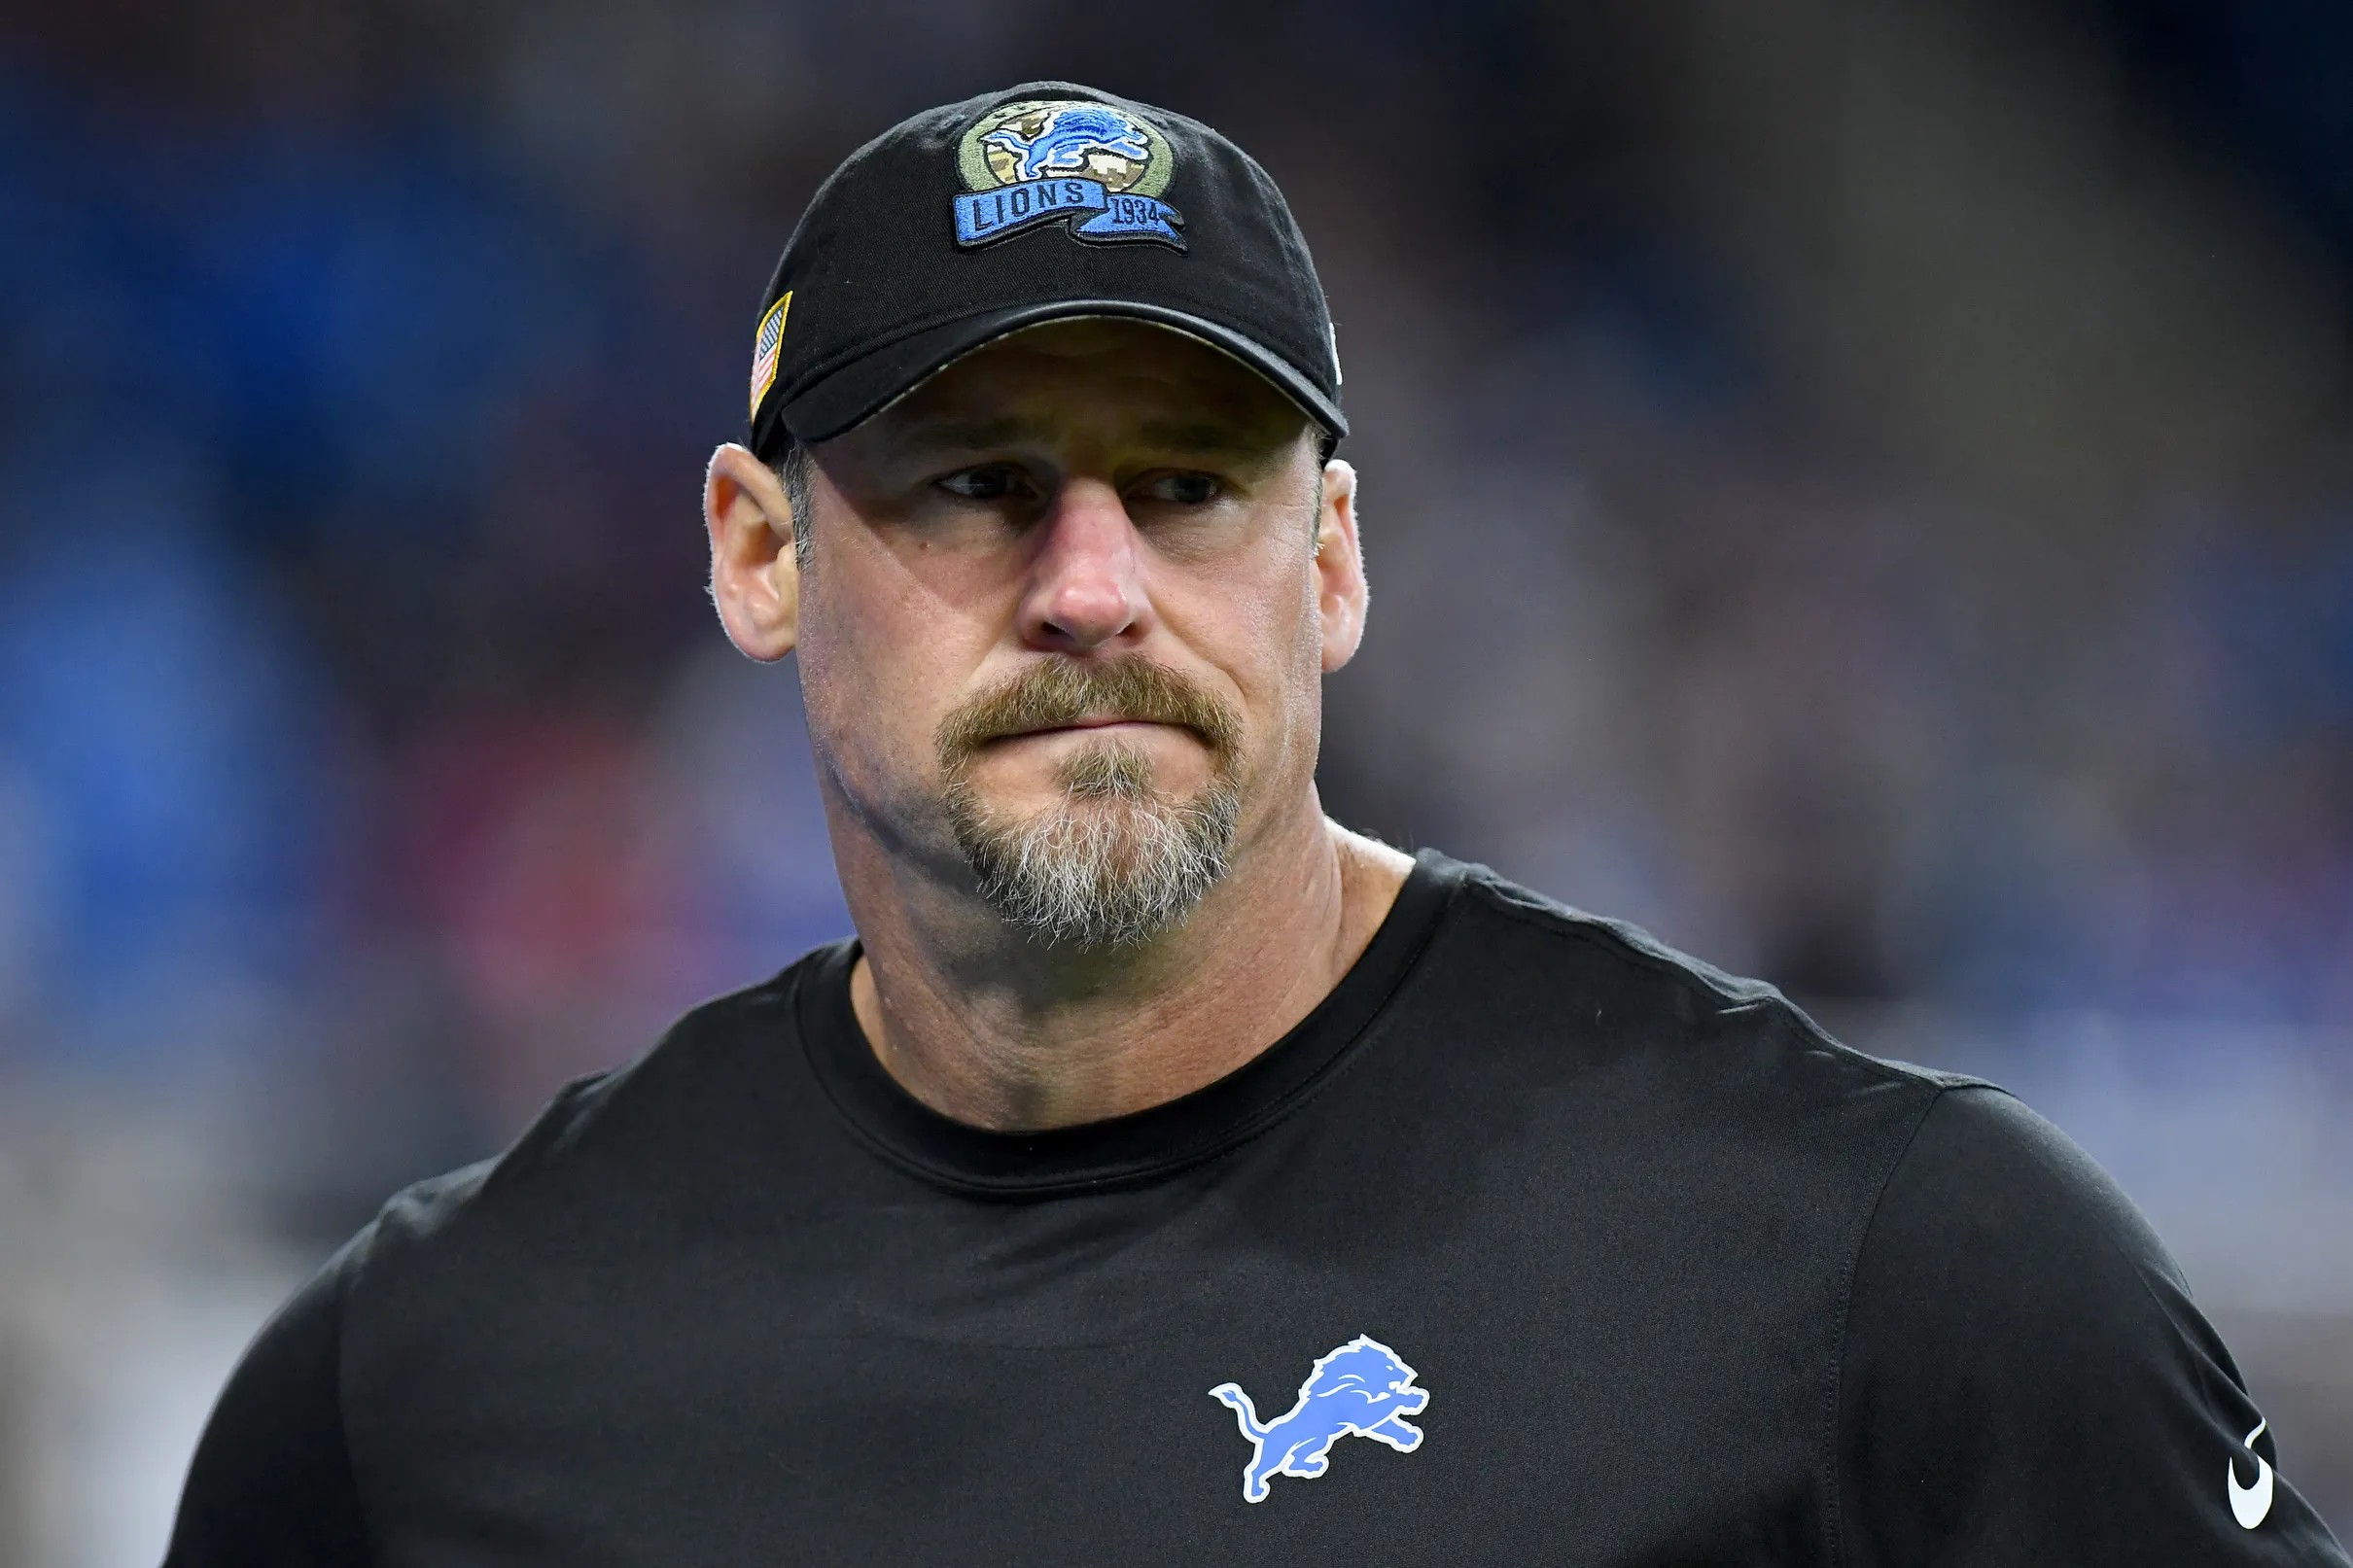 Lions coach Dan Campbell reacts to NFL opener vs. Chiefs ‘Doesn’t get